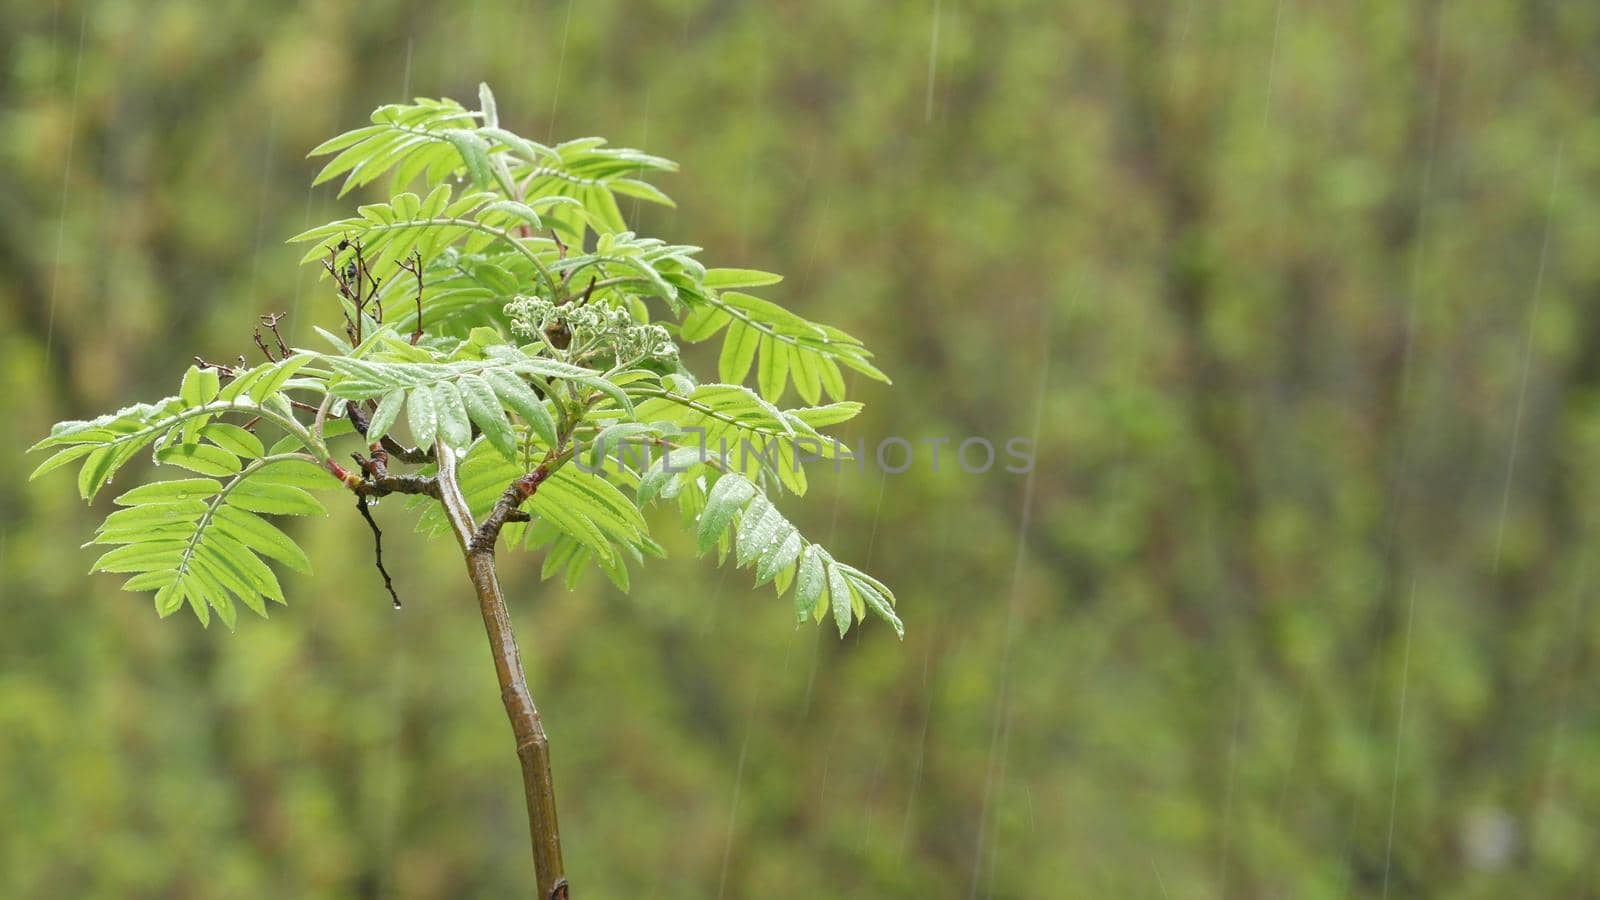 Rain drops on moist leaves in spring forest. Droplets on wet green trees foliage by DogoraSun